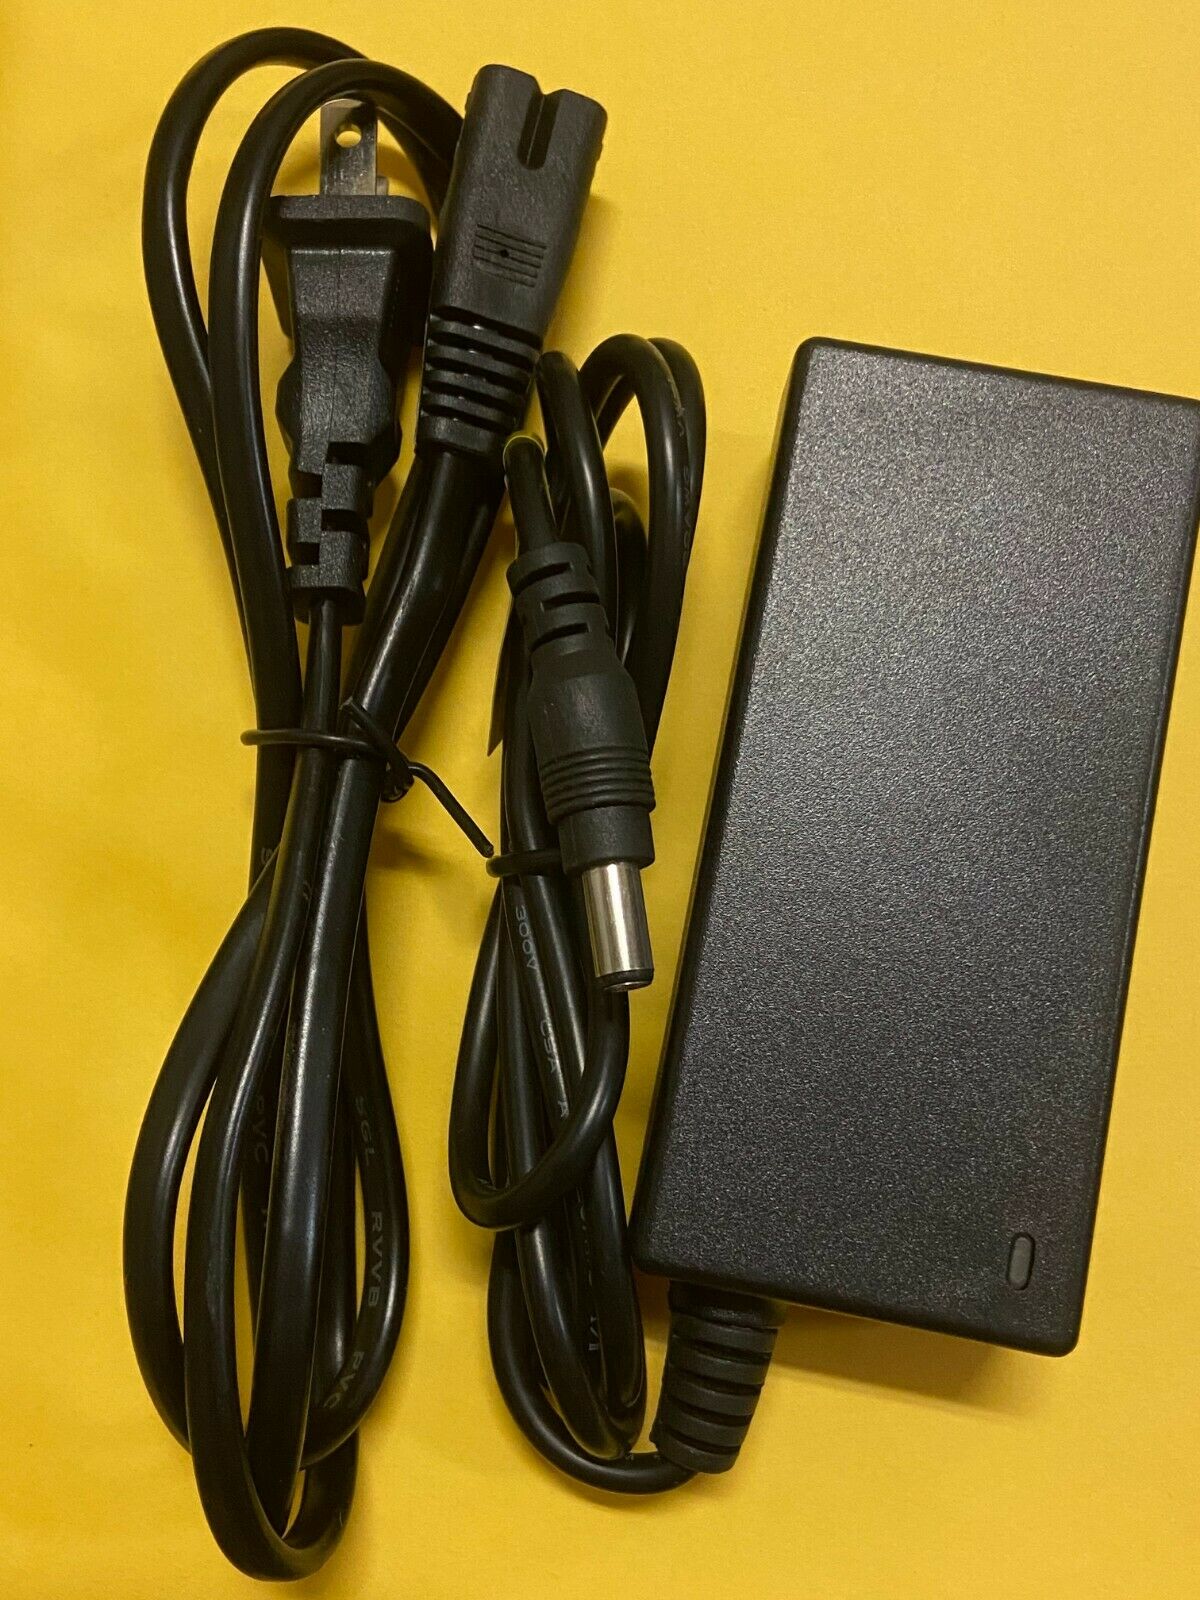 Power Charger AC Adapter 10.5V 4.3A VGP-AC10V8 for SONY Vaio DUO 10 11 13 Series Colour: Black MPN: Does Not Apply C